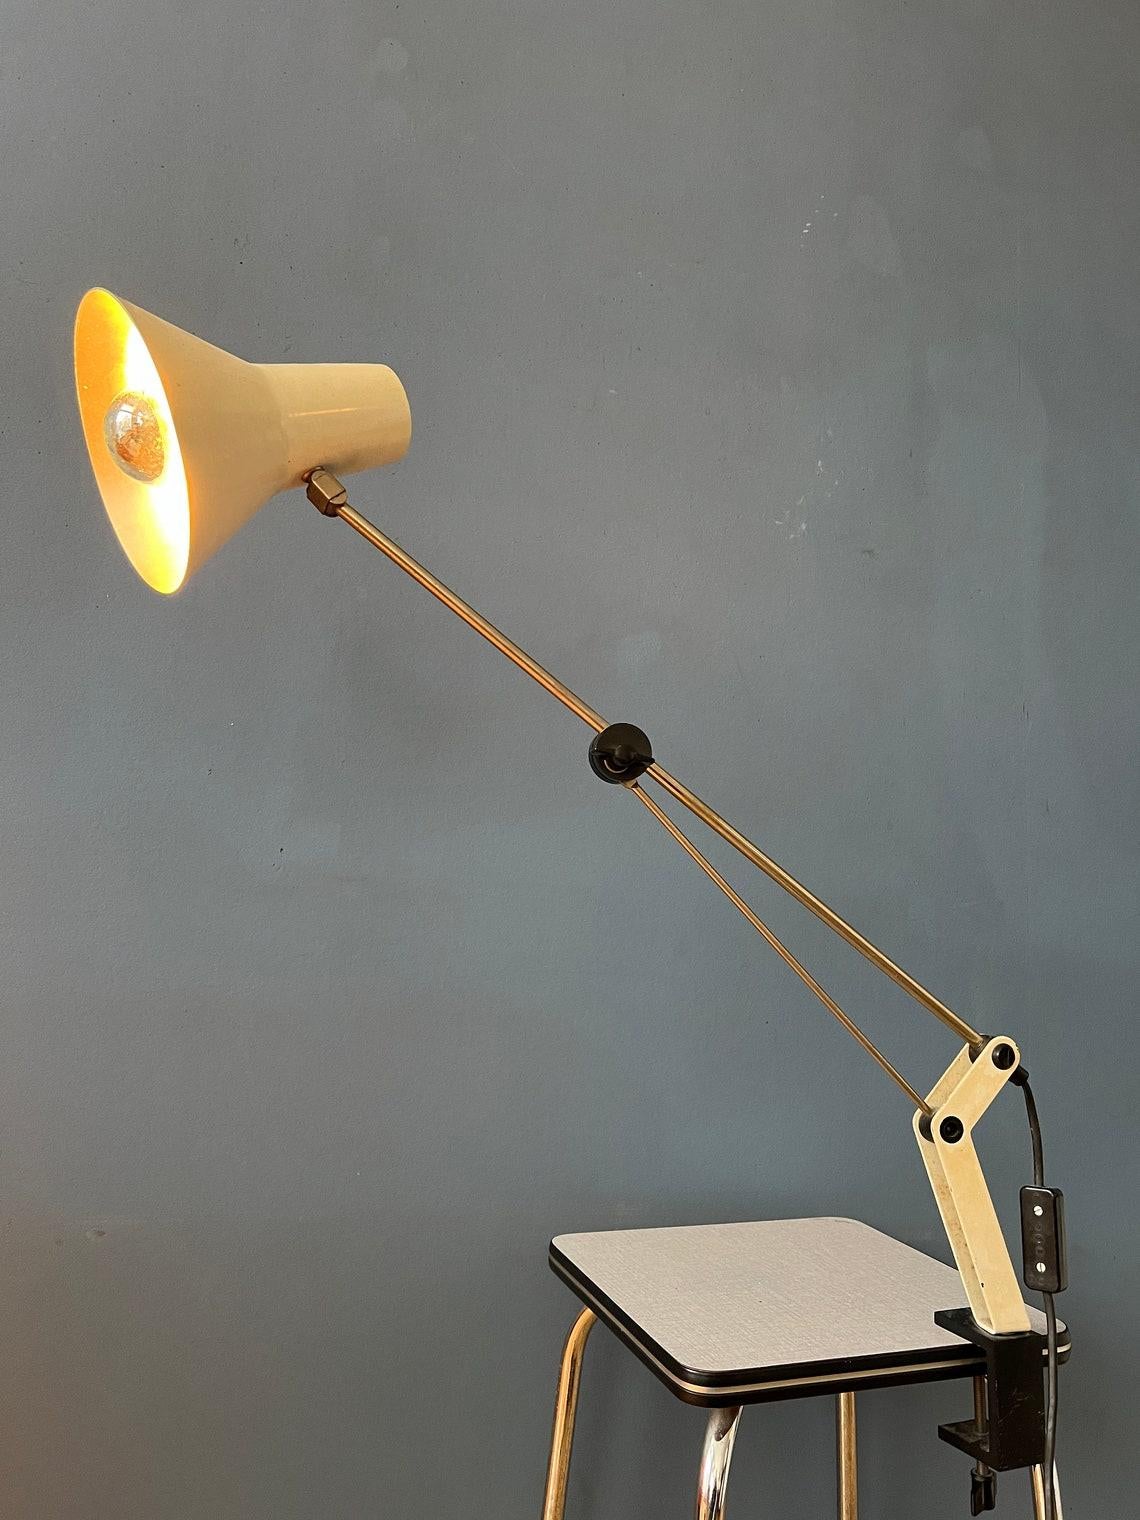 Mid century adjustable clamp desk lamp. The shade can easily be adjusted, as well as the height/length of the frame. It requires an E27/26 lightbulb and currently has an EU-plug (works outside EU with plug-converter).

Additional